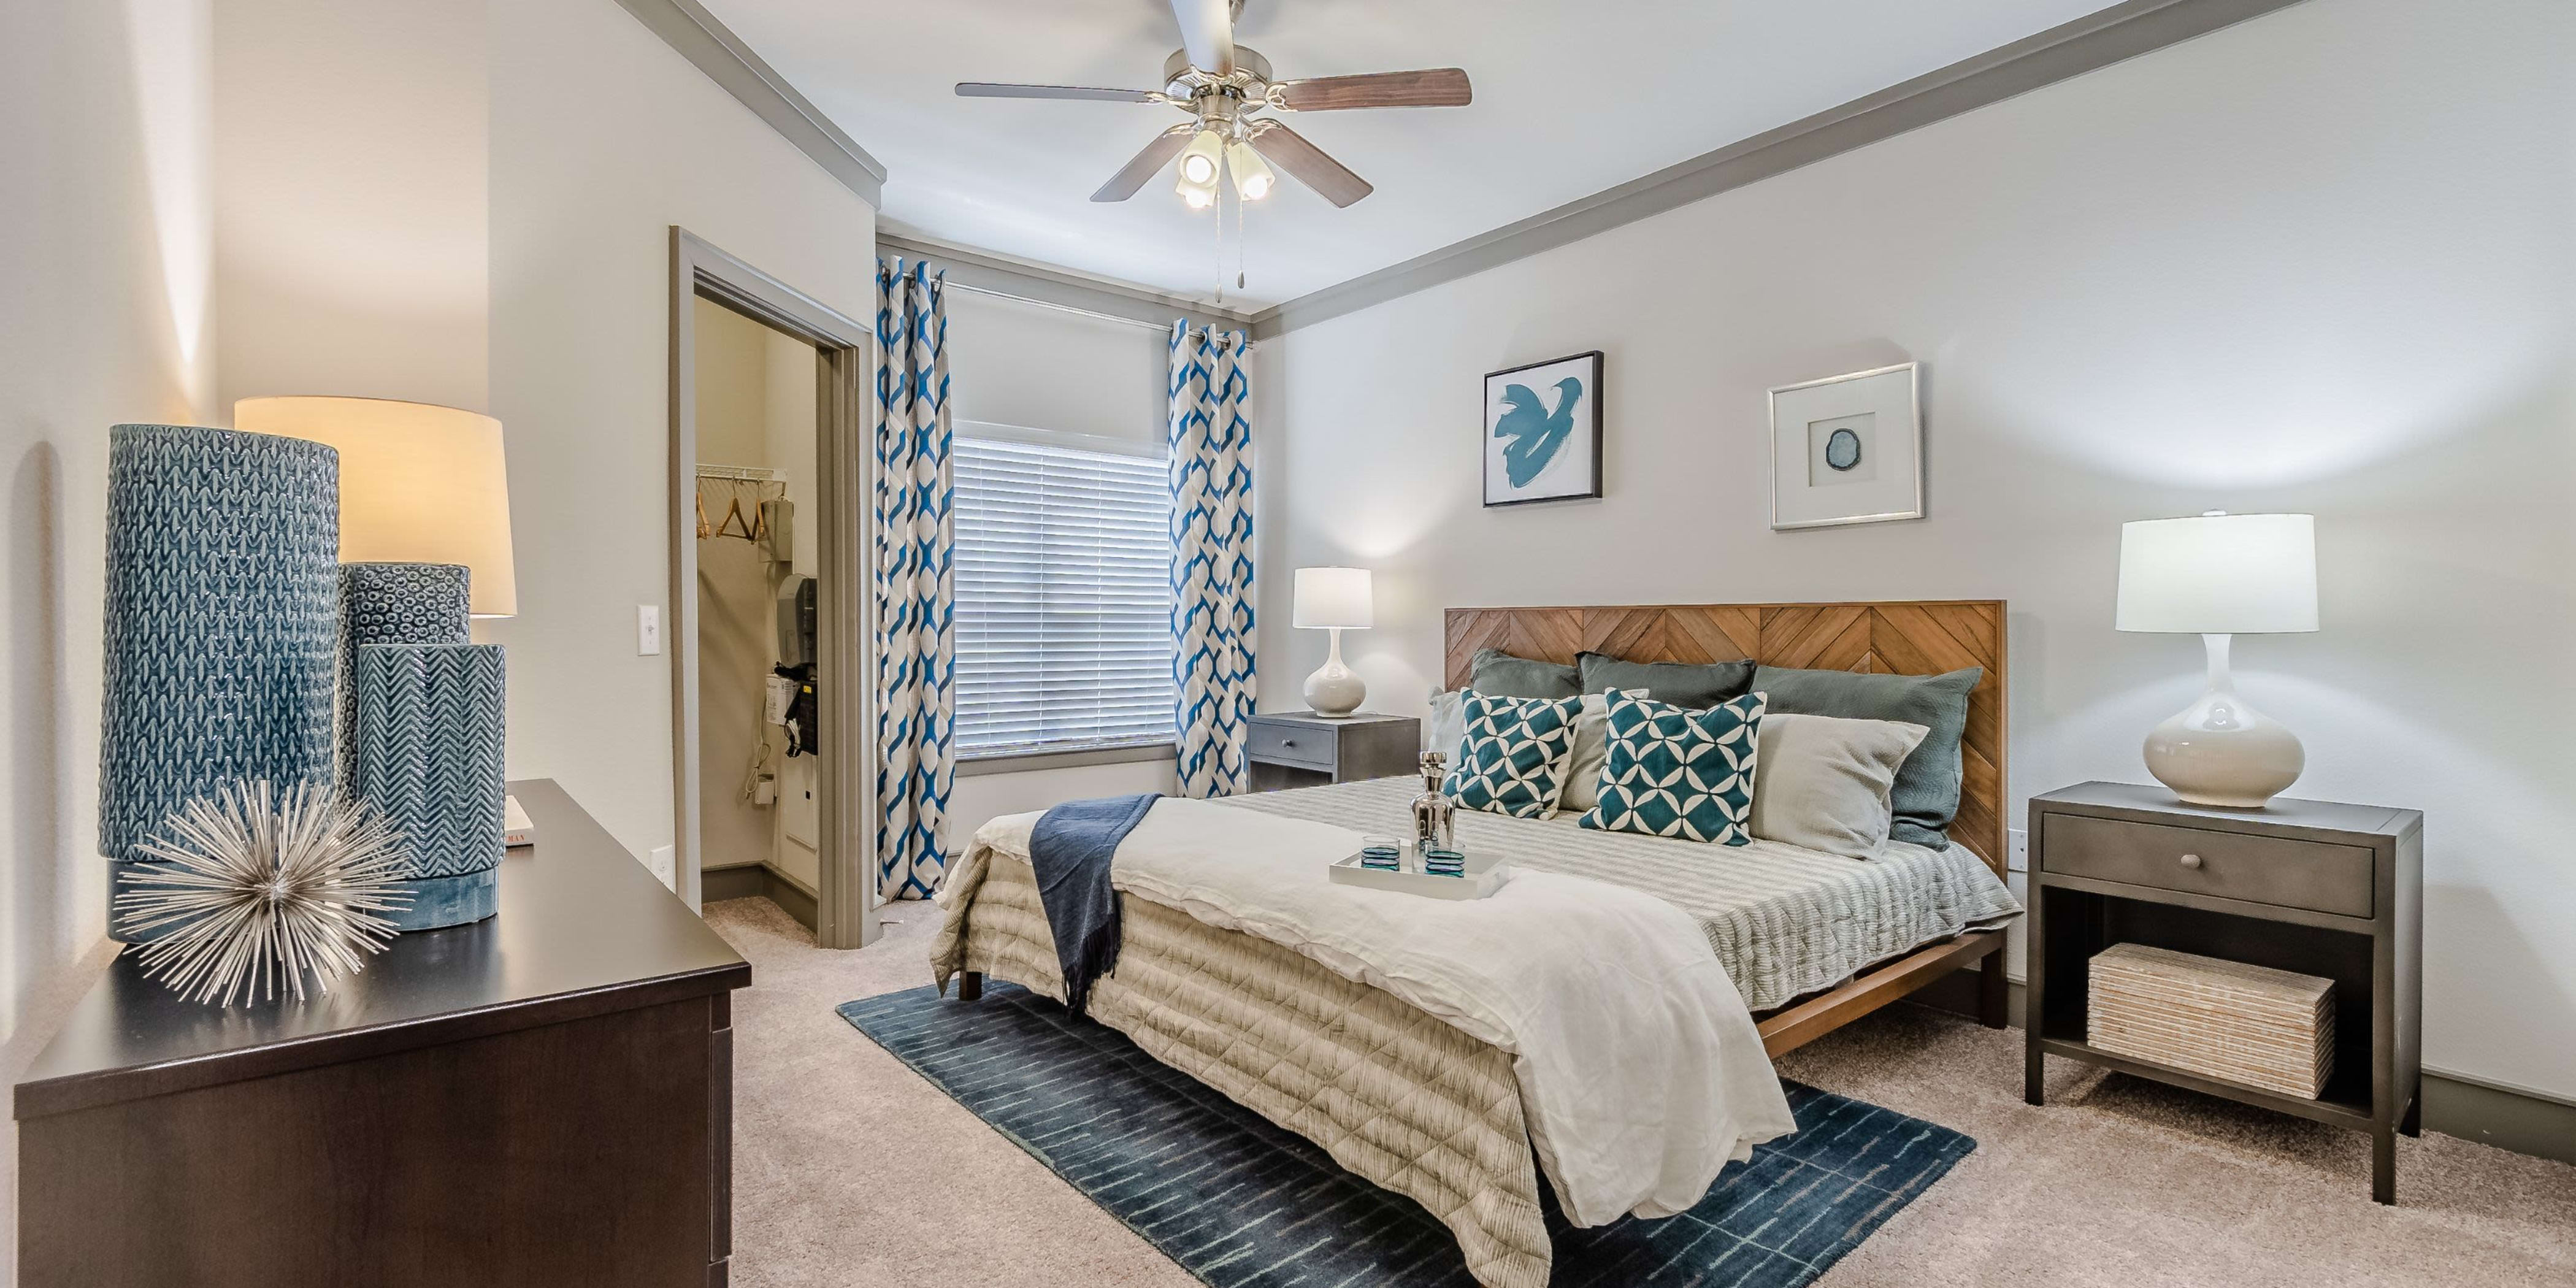 Master bedroom with a ceiling fan at Sorrel Phillips Creek Ranch in Frisco, Texas